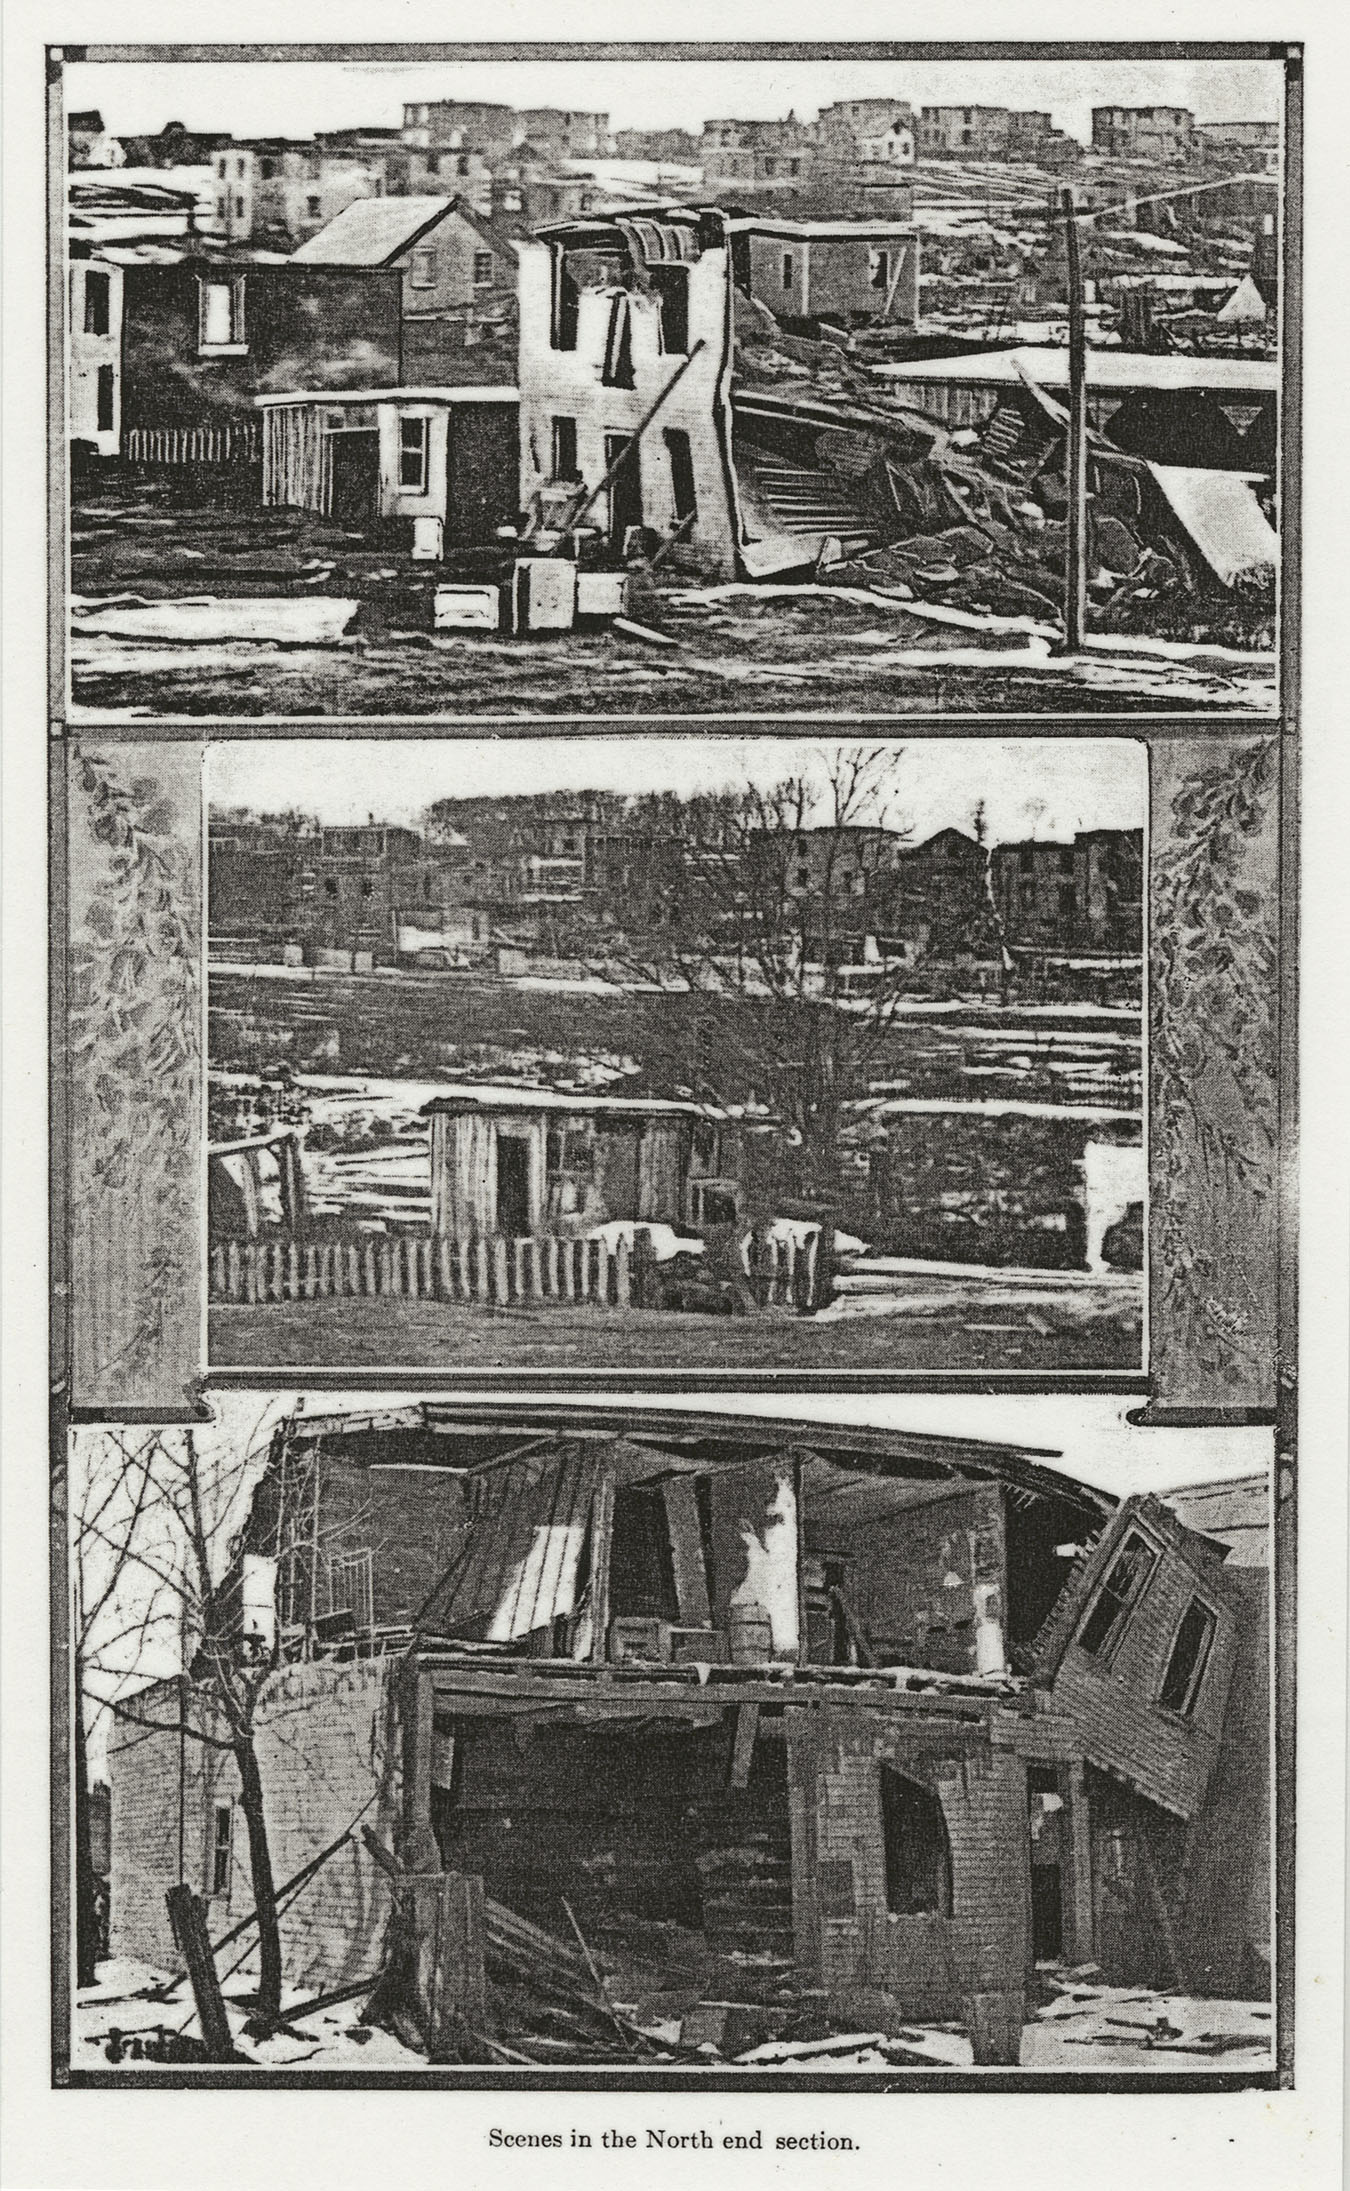 Taken from Lt.-Col. F. McKelvey Bell, <i> A Romance of the Halifax Disaster</i> (Halifax, 1918).